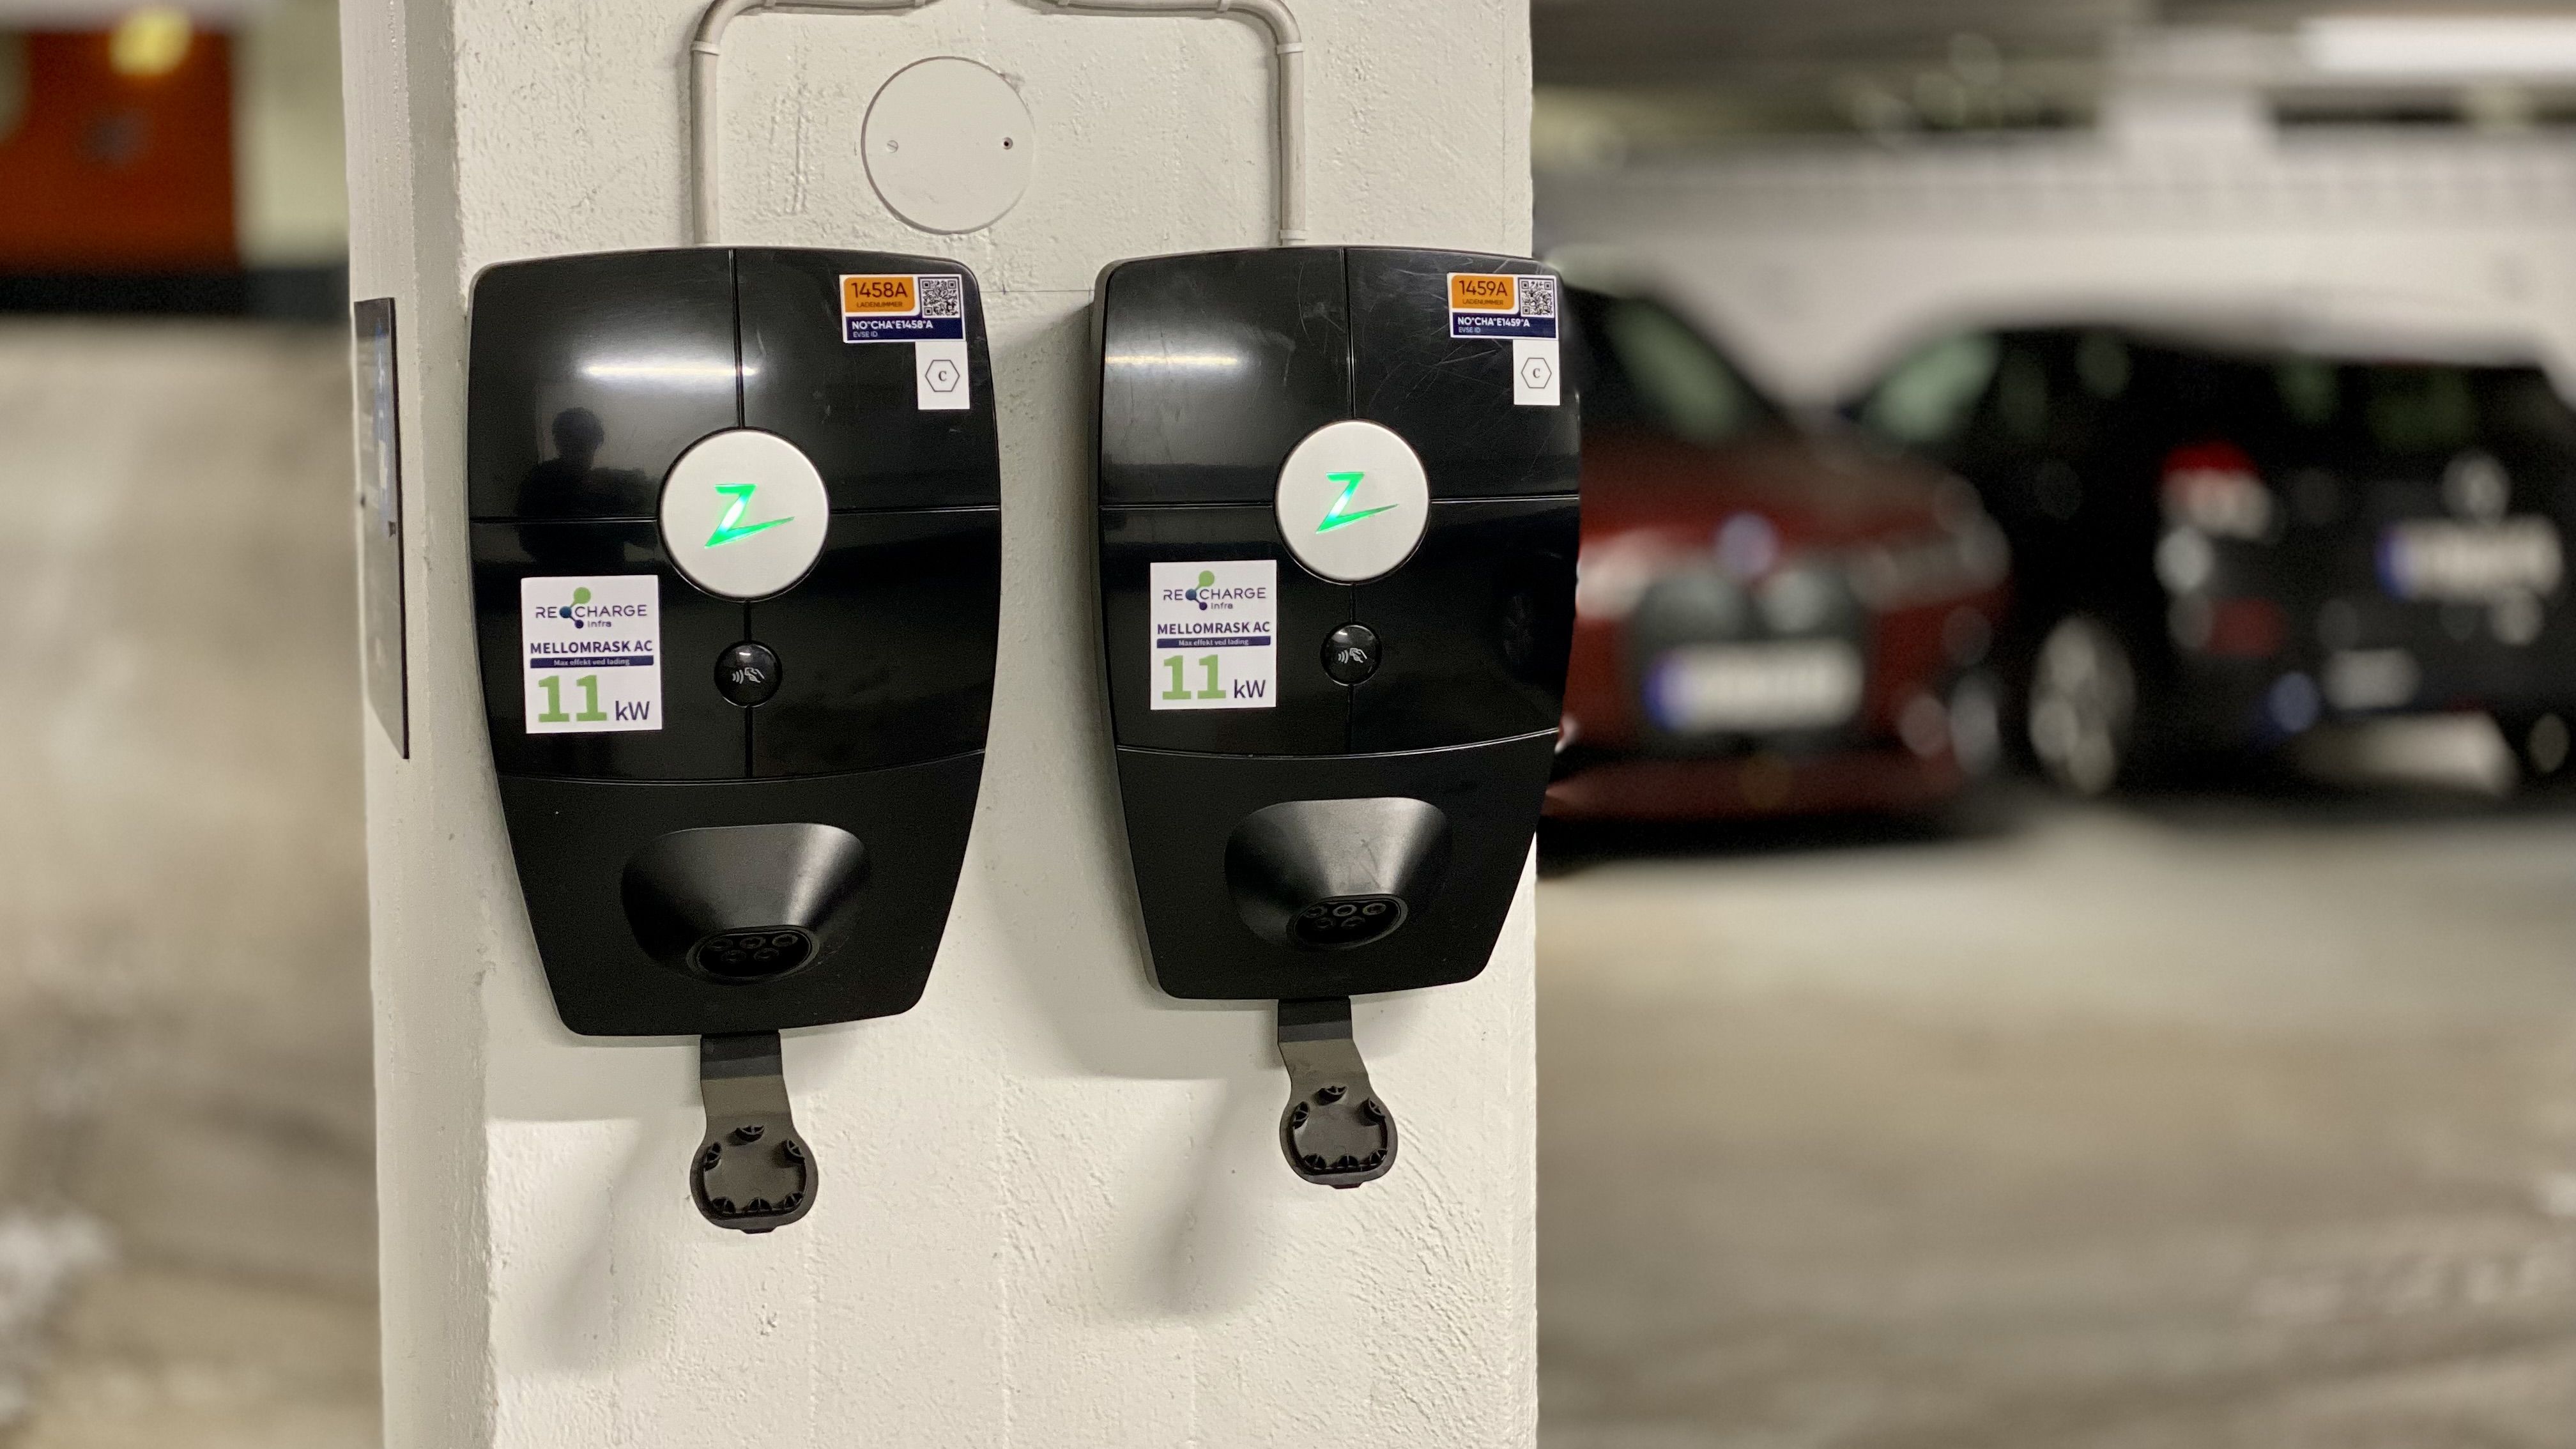 Reverse Engineering Reveals EV Charger Has A Sense Of Security